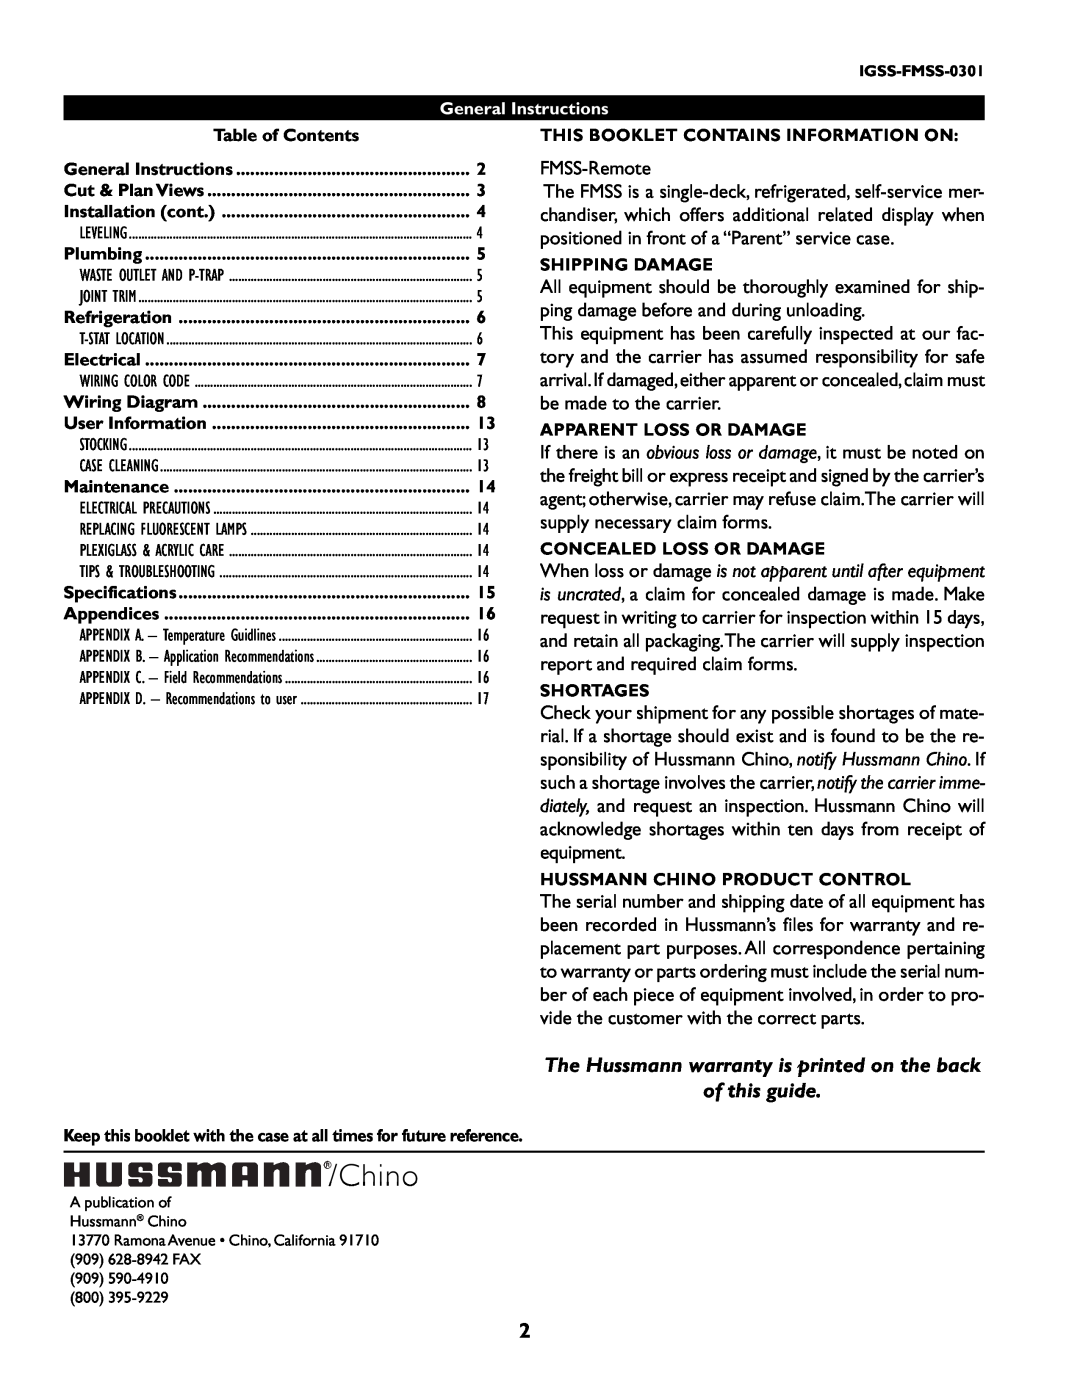 hussman IGSS-FMSS-0301 manual The Hussmann warranty is printed on the back of this guide, Chino 